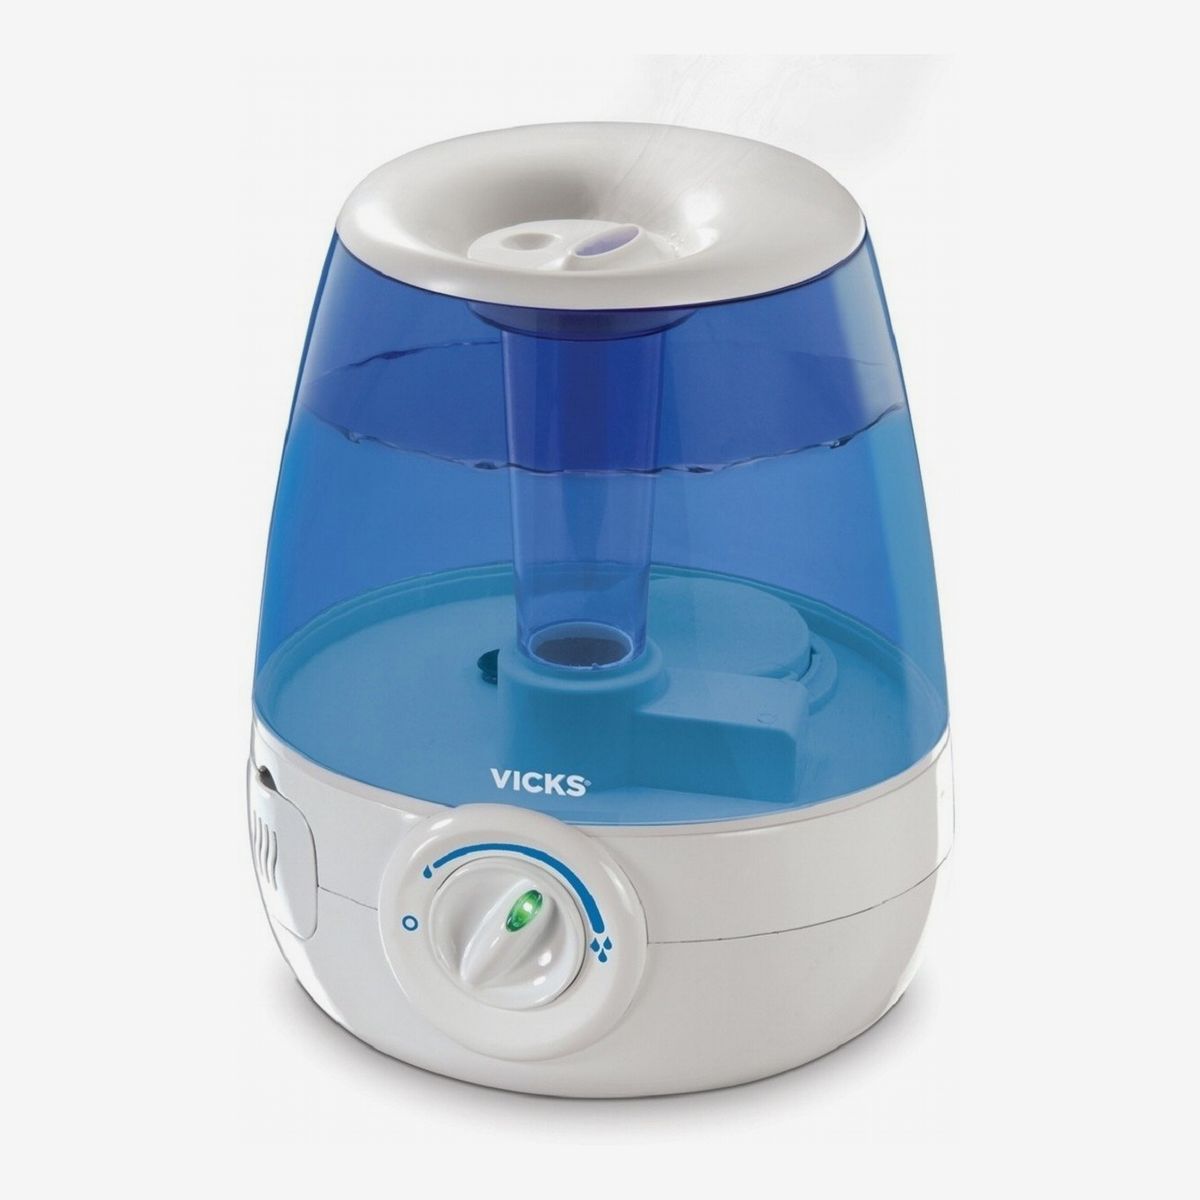 large filterless humidifier